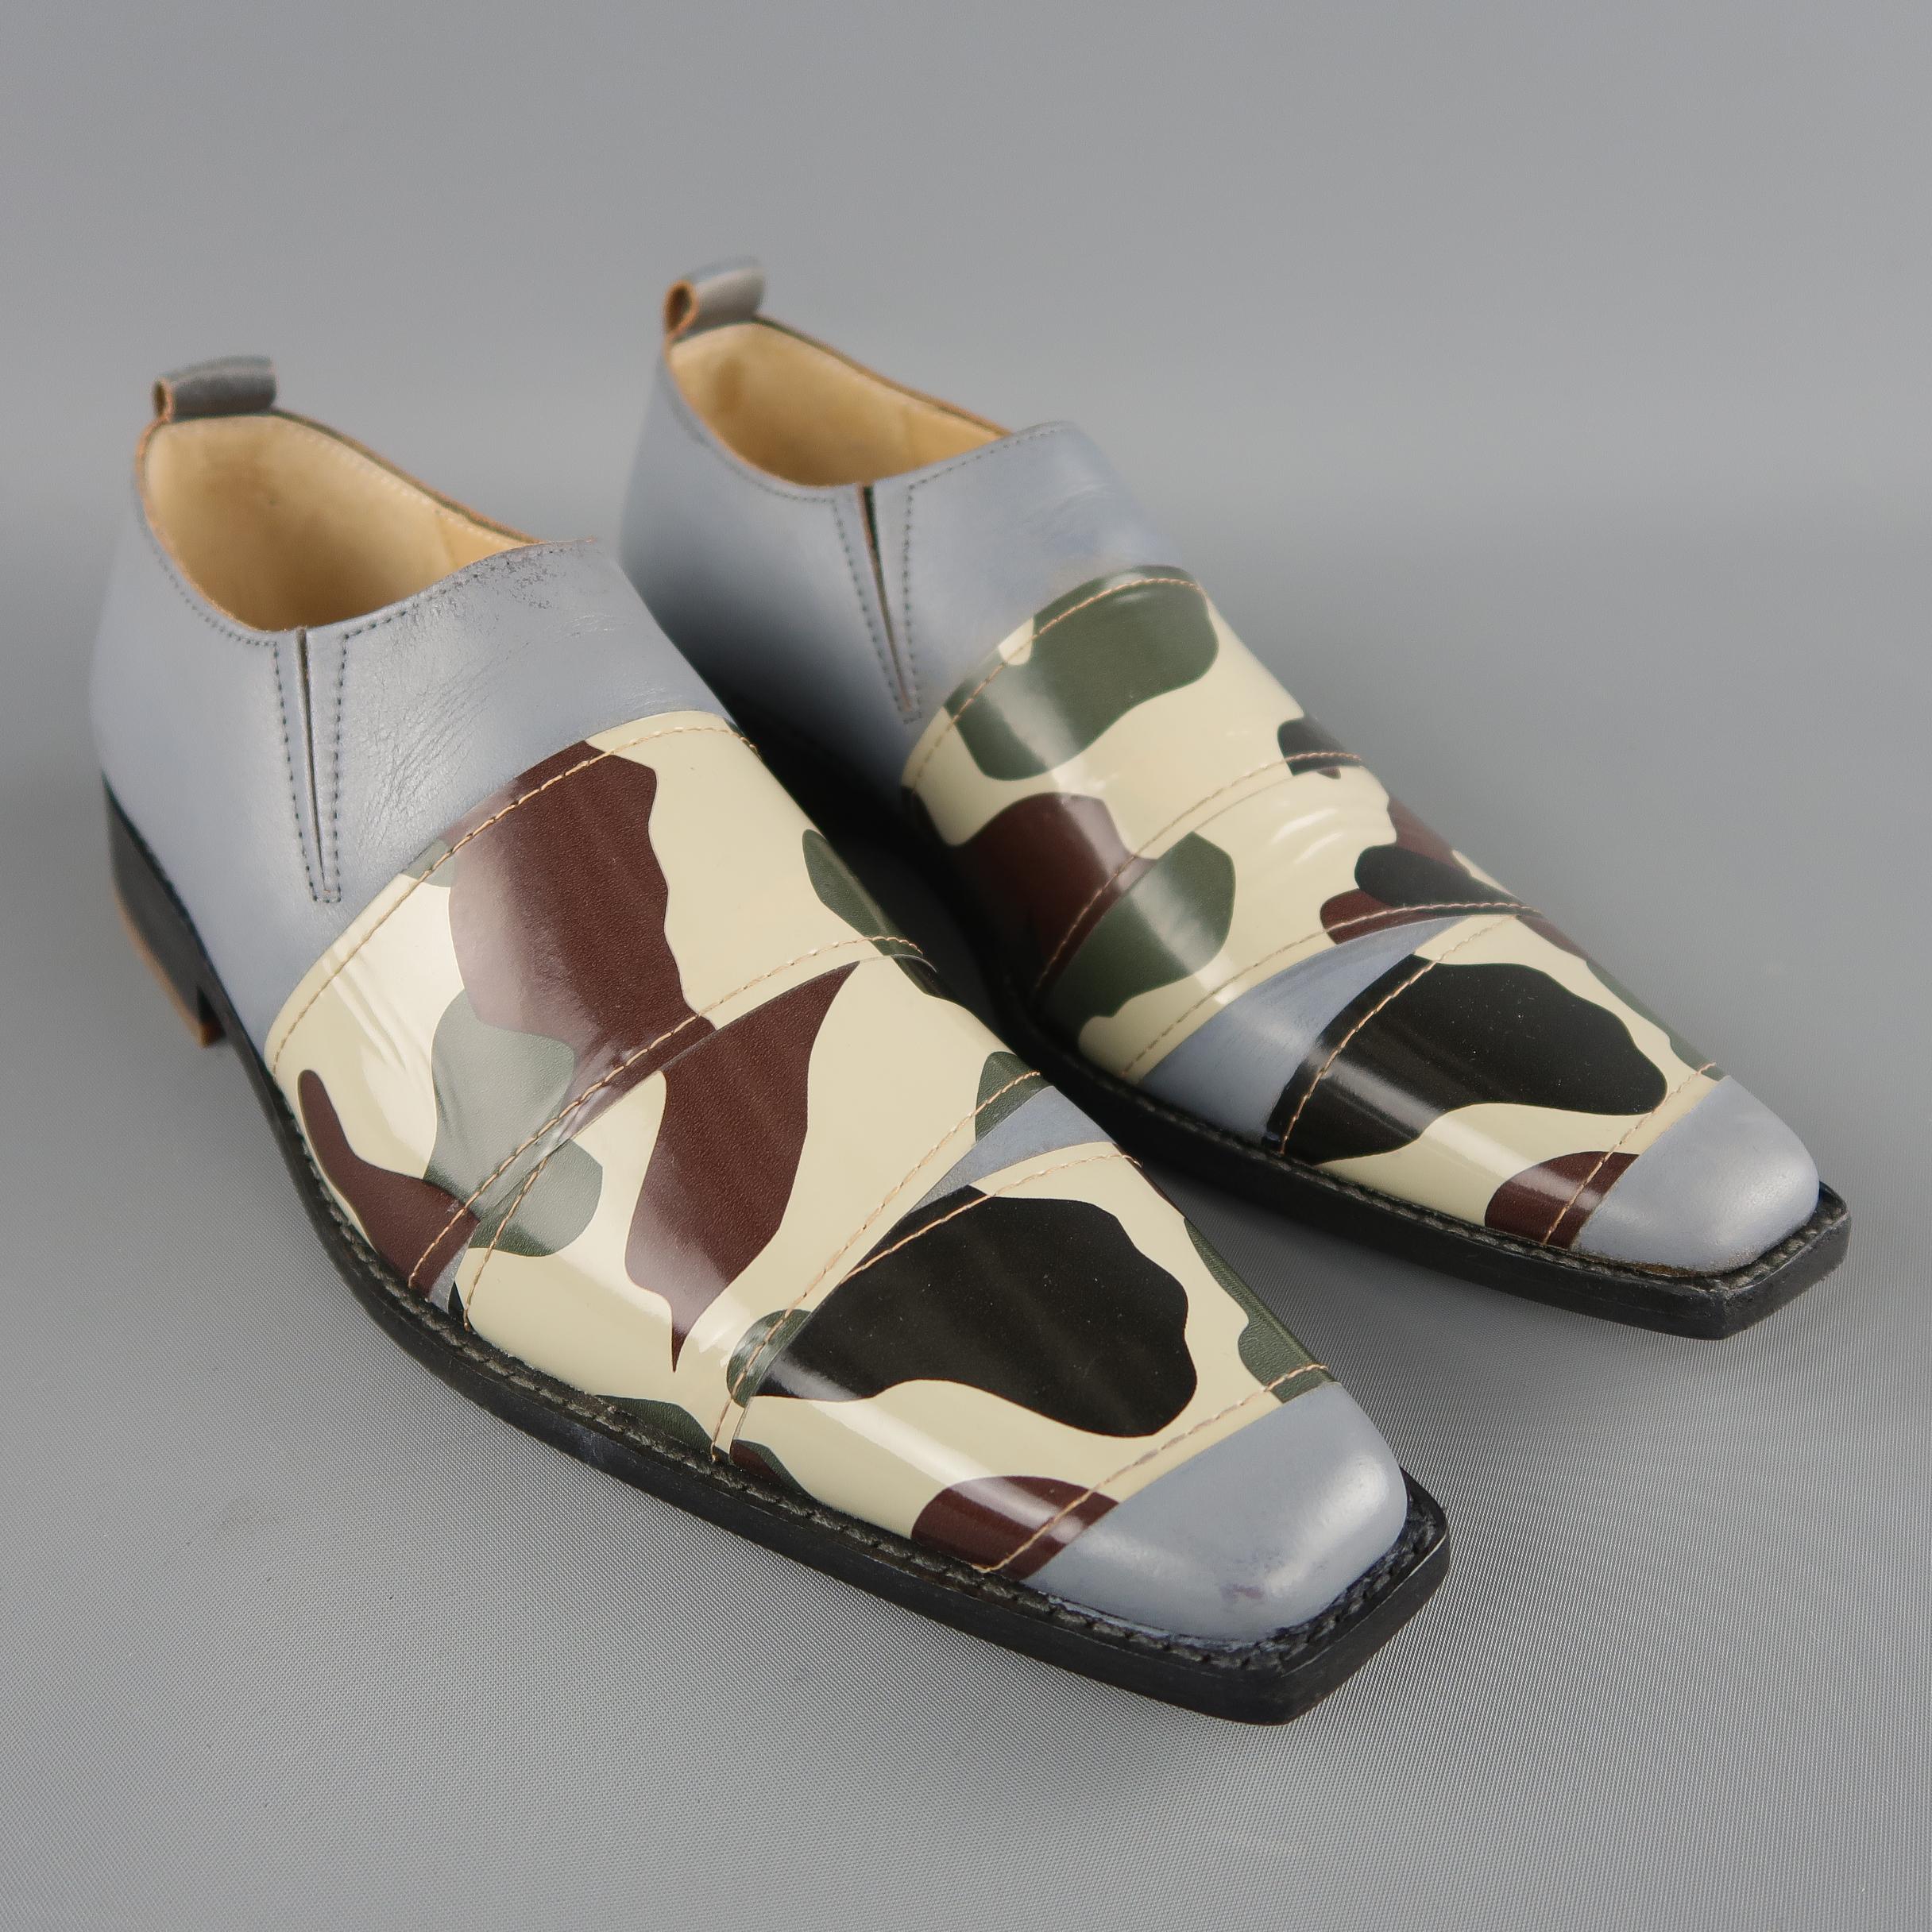 COMME des GARCONS Homme Plus loafers dress shoes come in gray leather with a squared pointed toe, black heeled sole, an camouflage patent leather strap applique. New with Box. A couple scuffs from storage. Made in Japan.
 
New With Box.
Marked: 24
